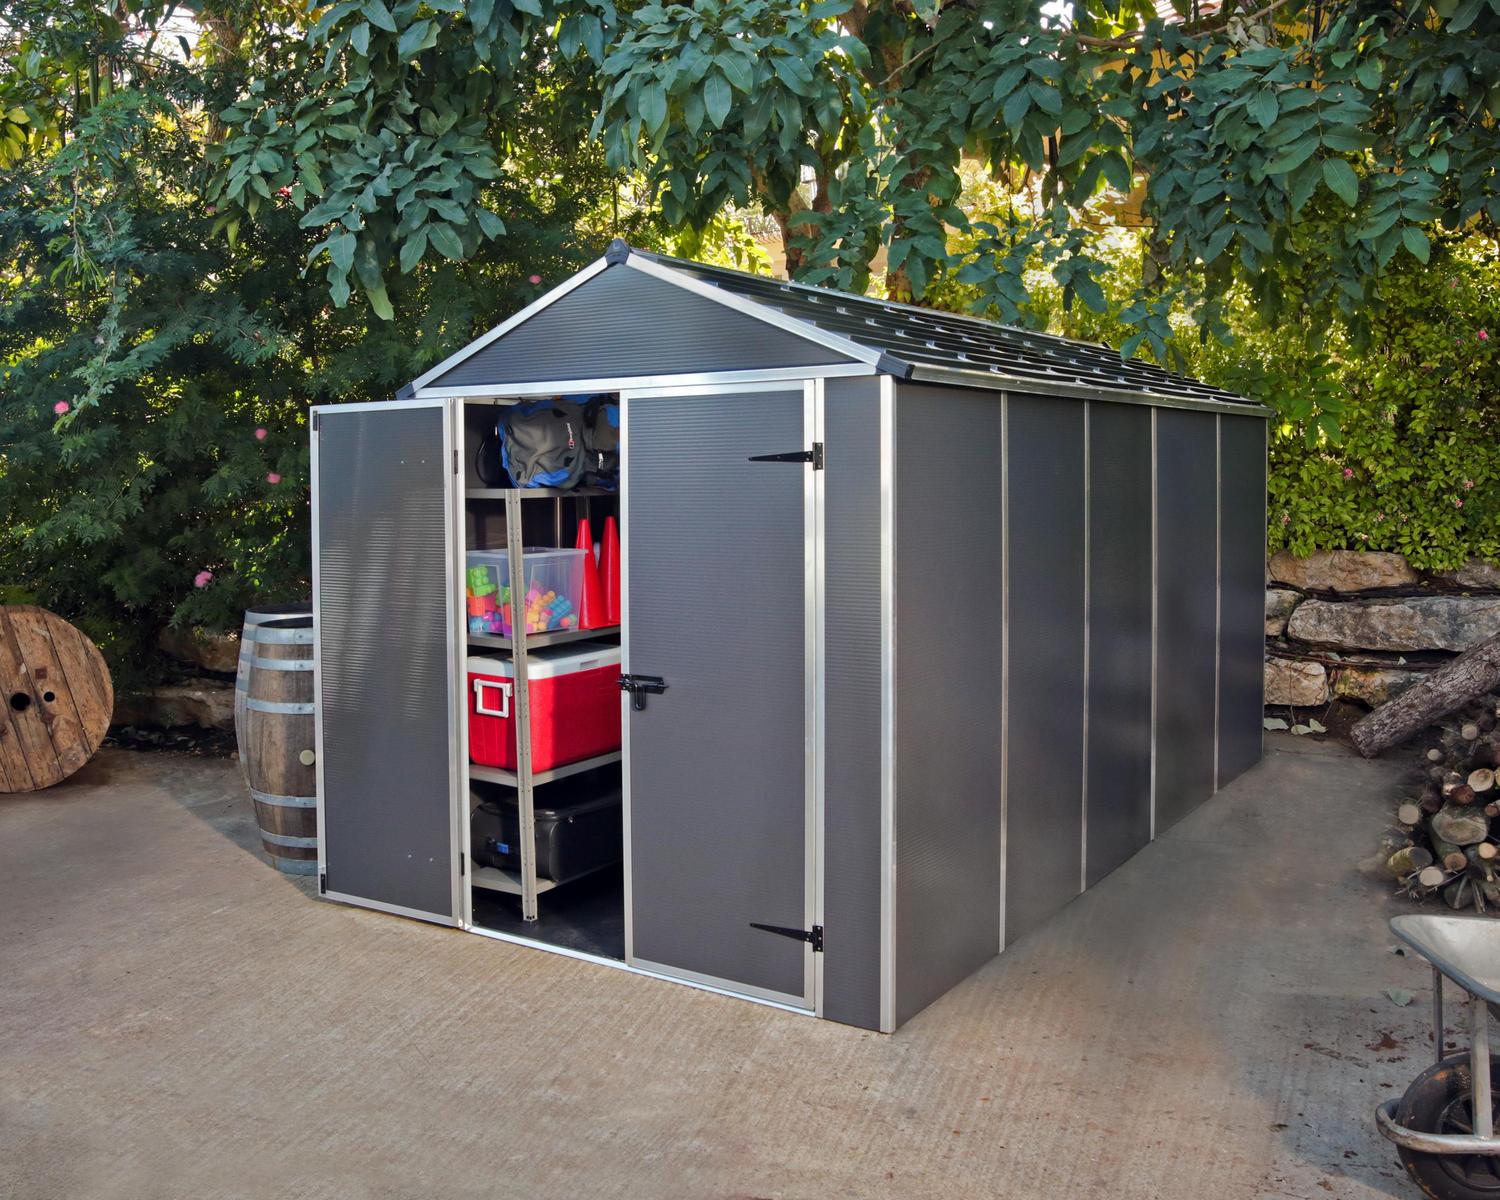 Rubicon 6' x 12' Plastic Garden Shed with Open Doors Dark Grey Polycarbonate Walls and Aluminium Frame